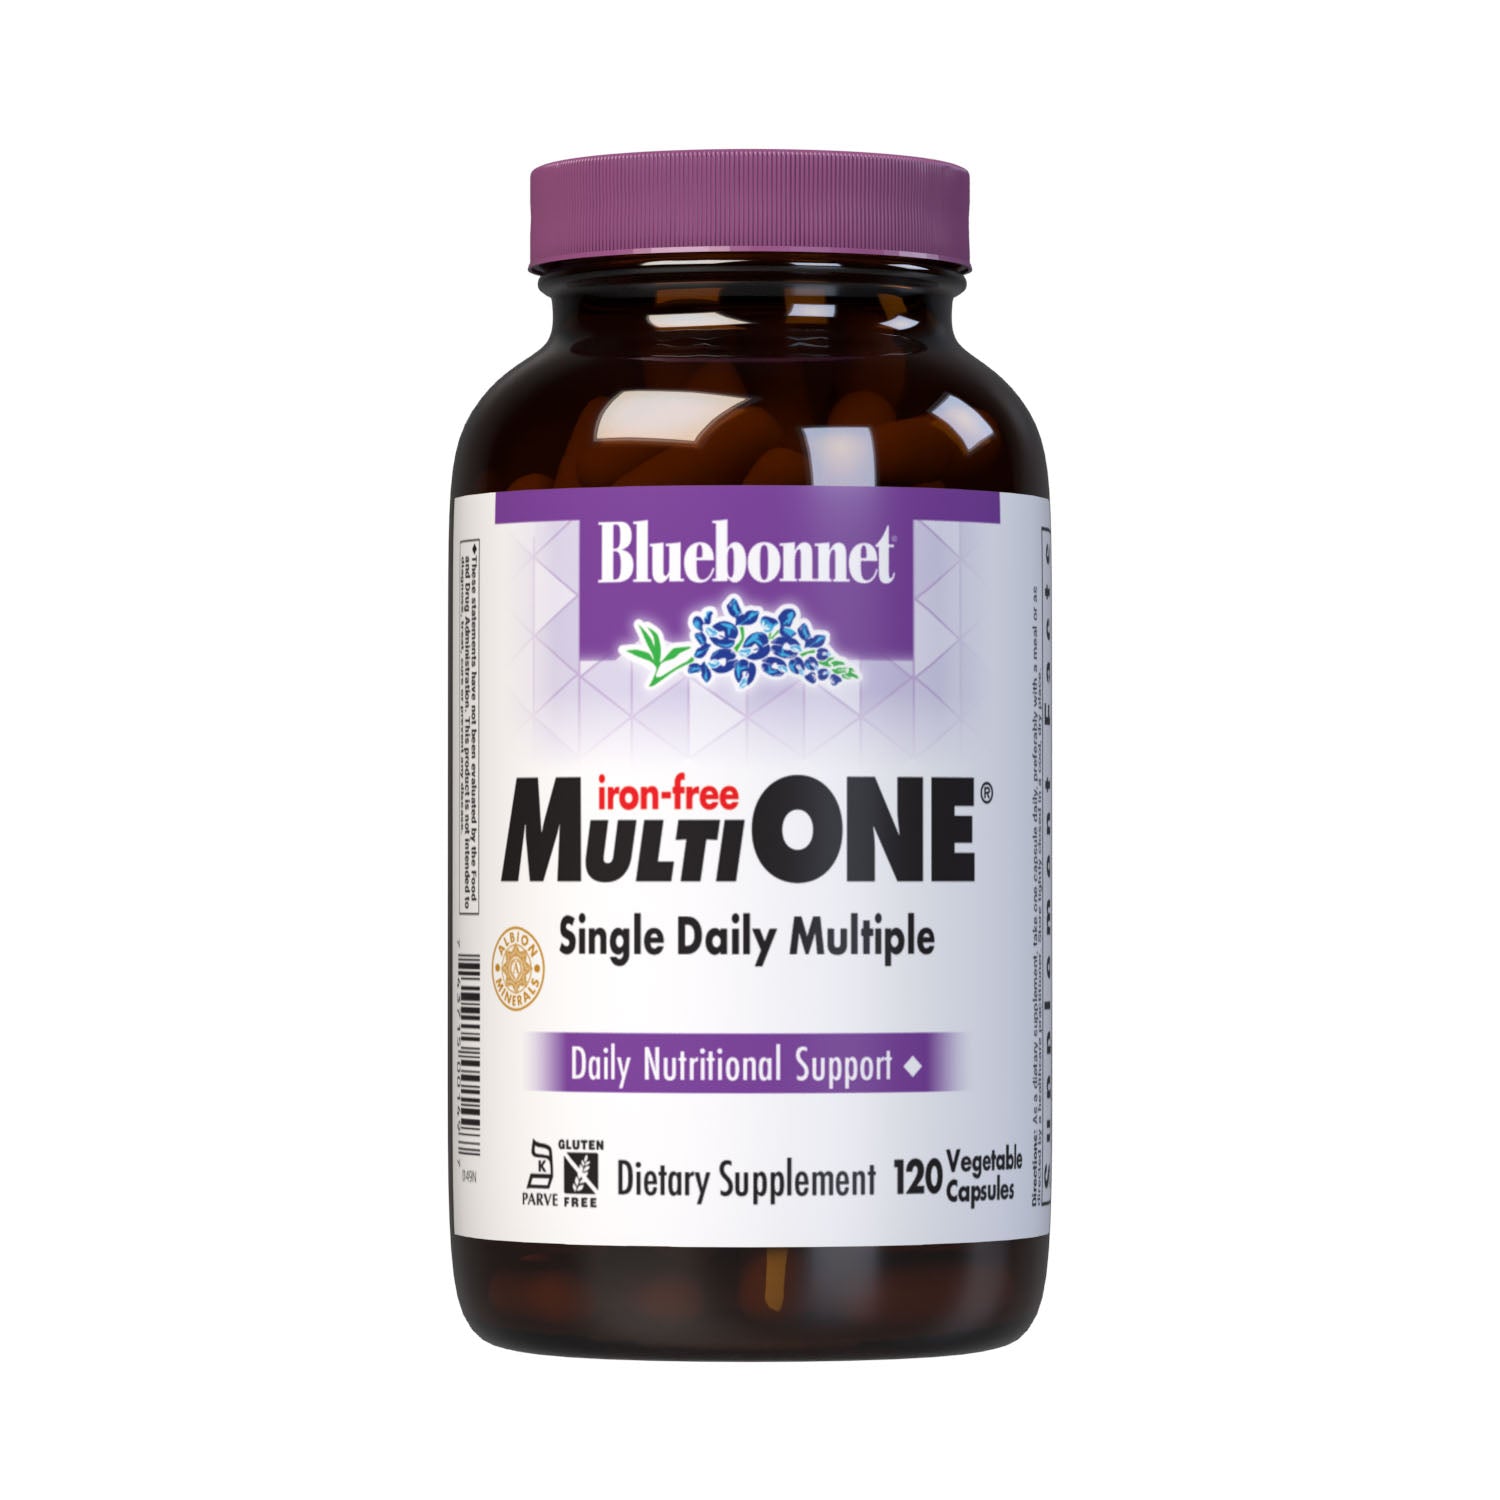 Bluebonnet’s Multi One Iron-free Single Daily Multiple 120 vegetable capsules is formulated with crucial vitamins and minerals, plus Albion chelated minerals for daily nutrition and well being. #size_120 count